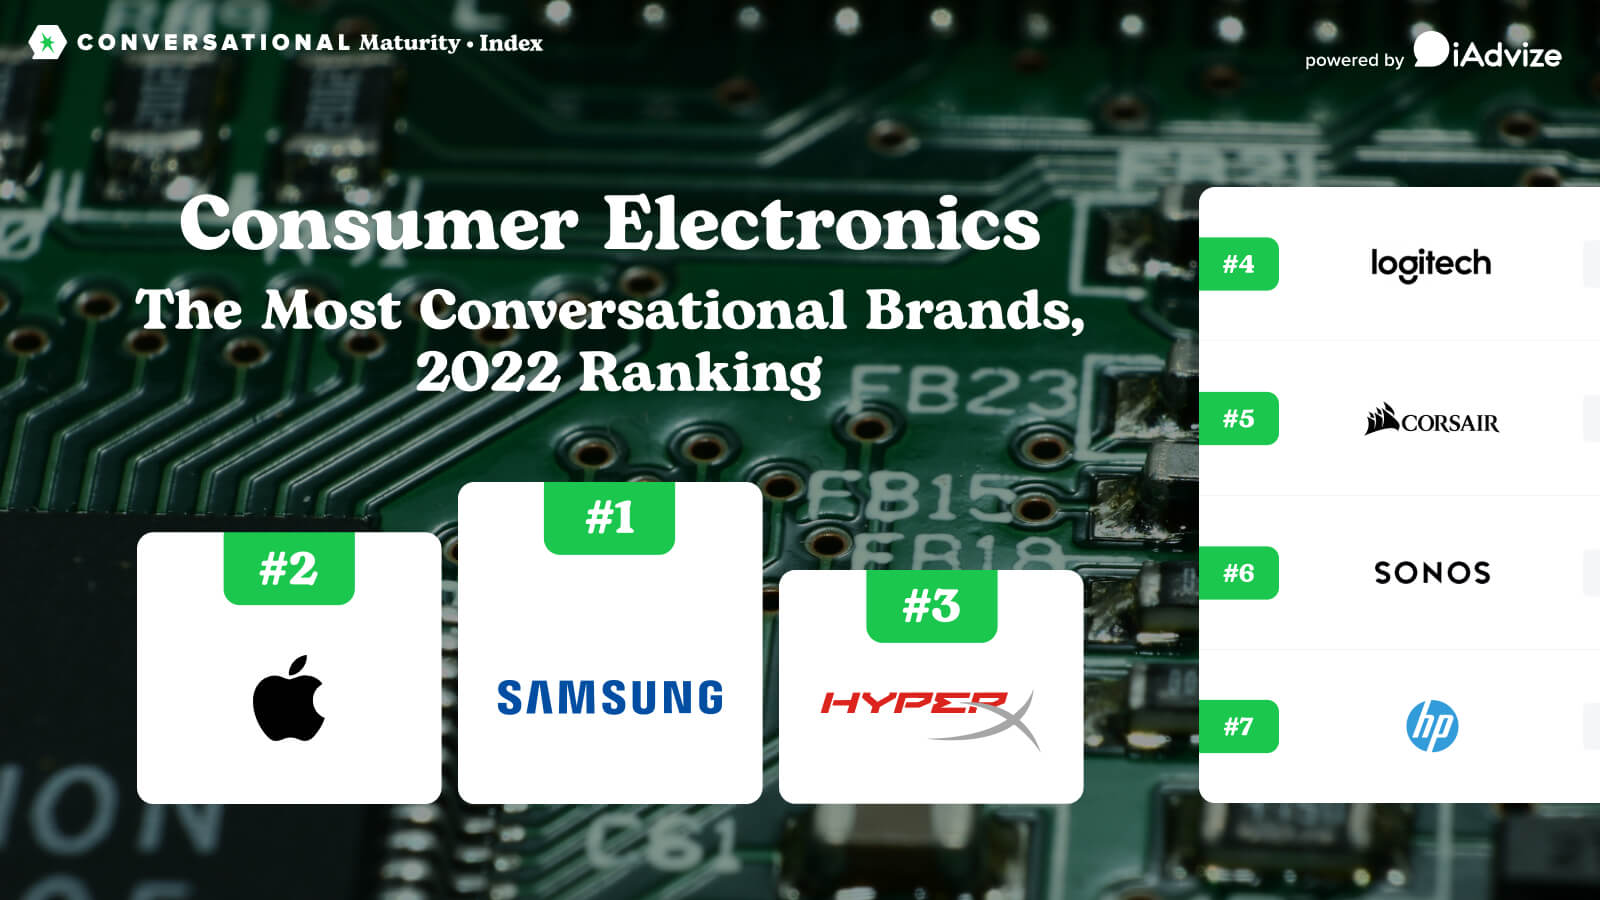  Featured image: Consumer electronics brands conversational maturity index 2022 - Read full post: Conversational Maturity Index: Consumer Electronics Brands 2022 Rankings